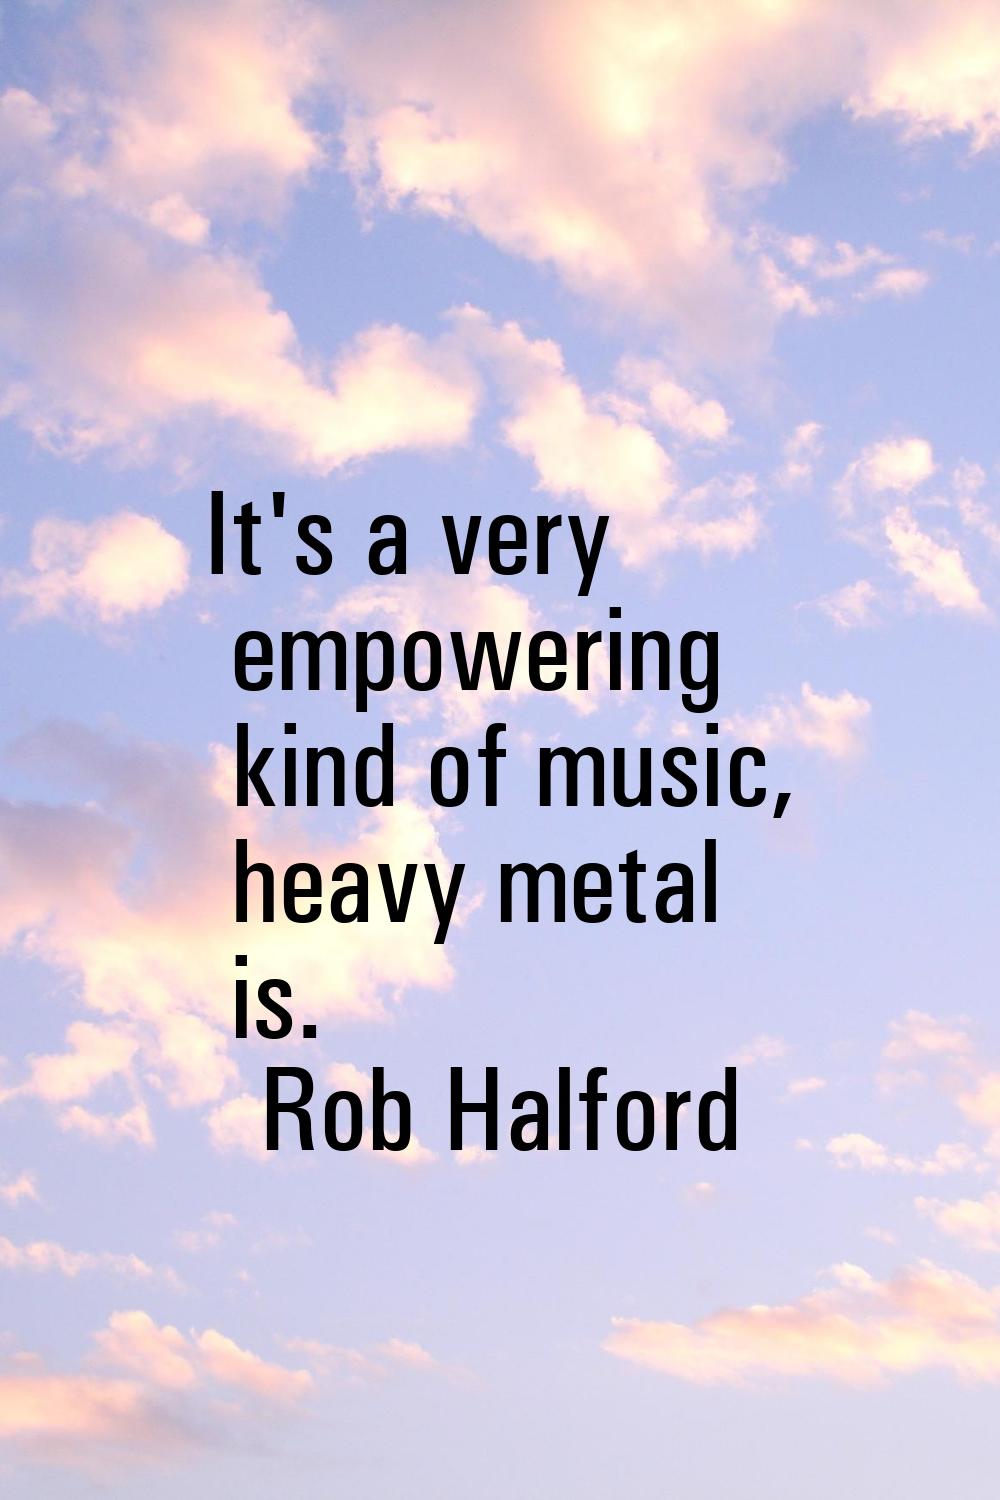 It's a very empowering kind of music, heavy metal is.